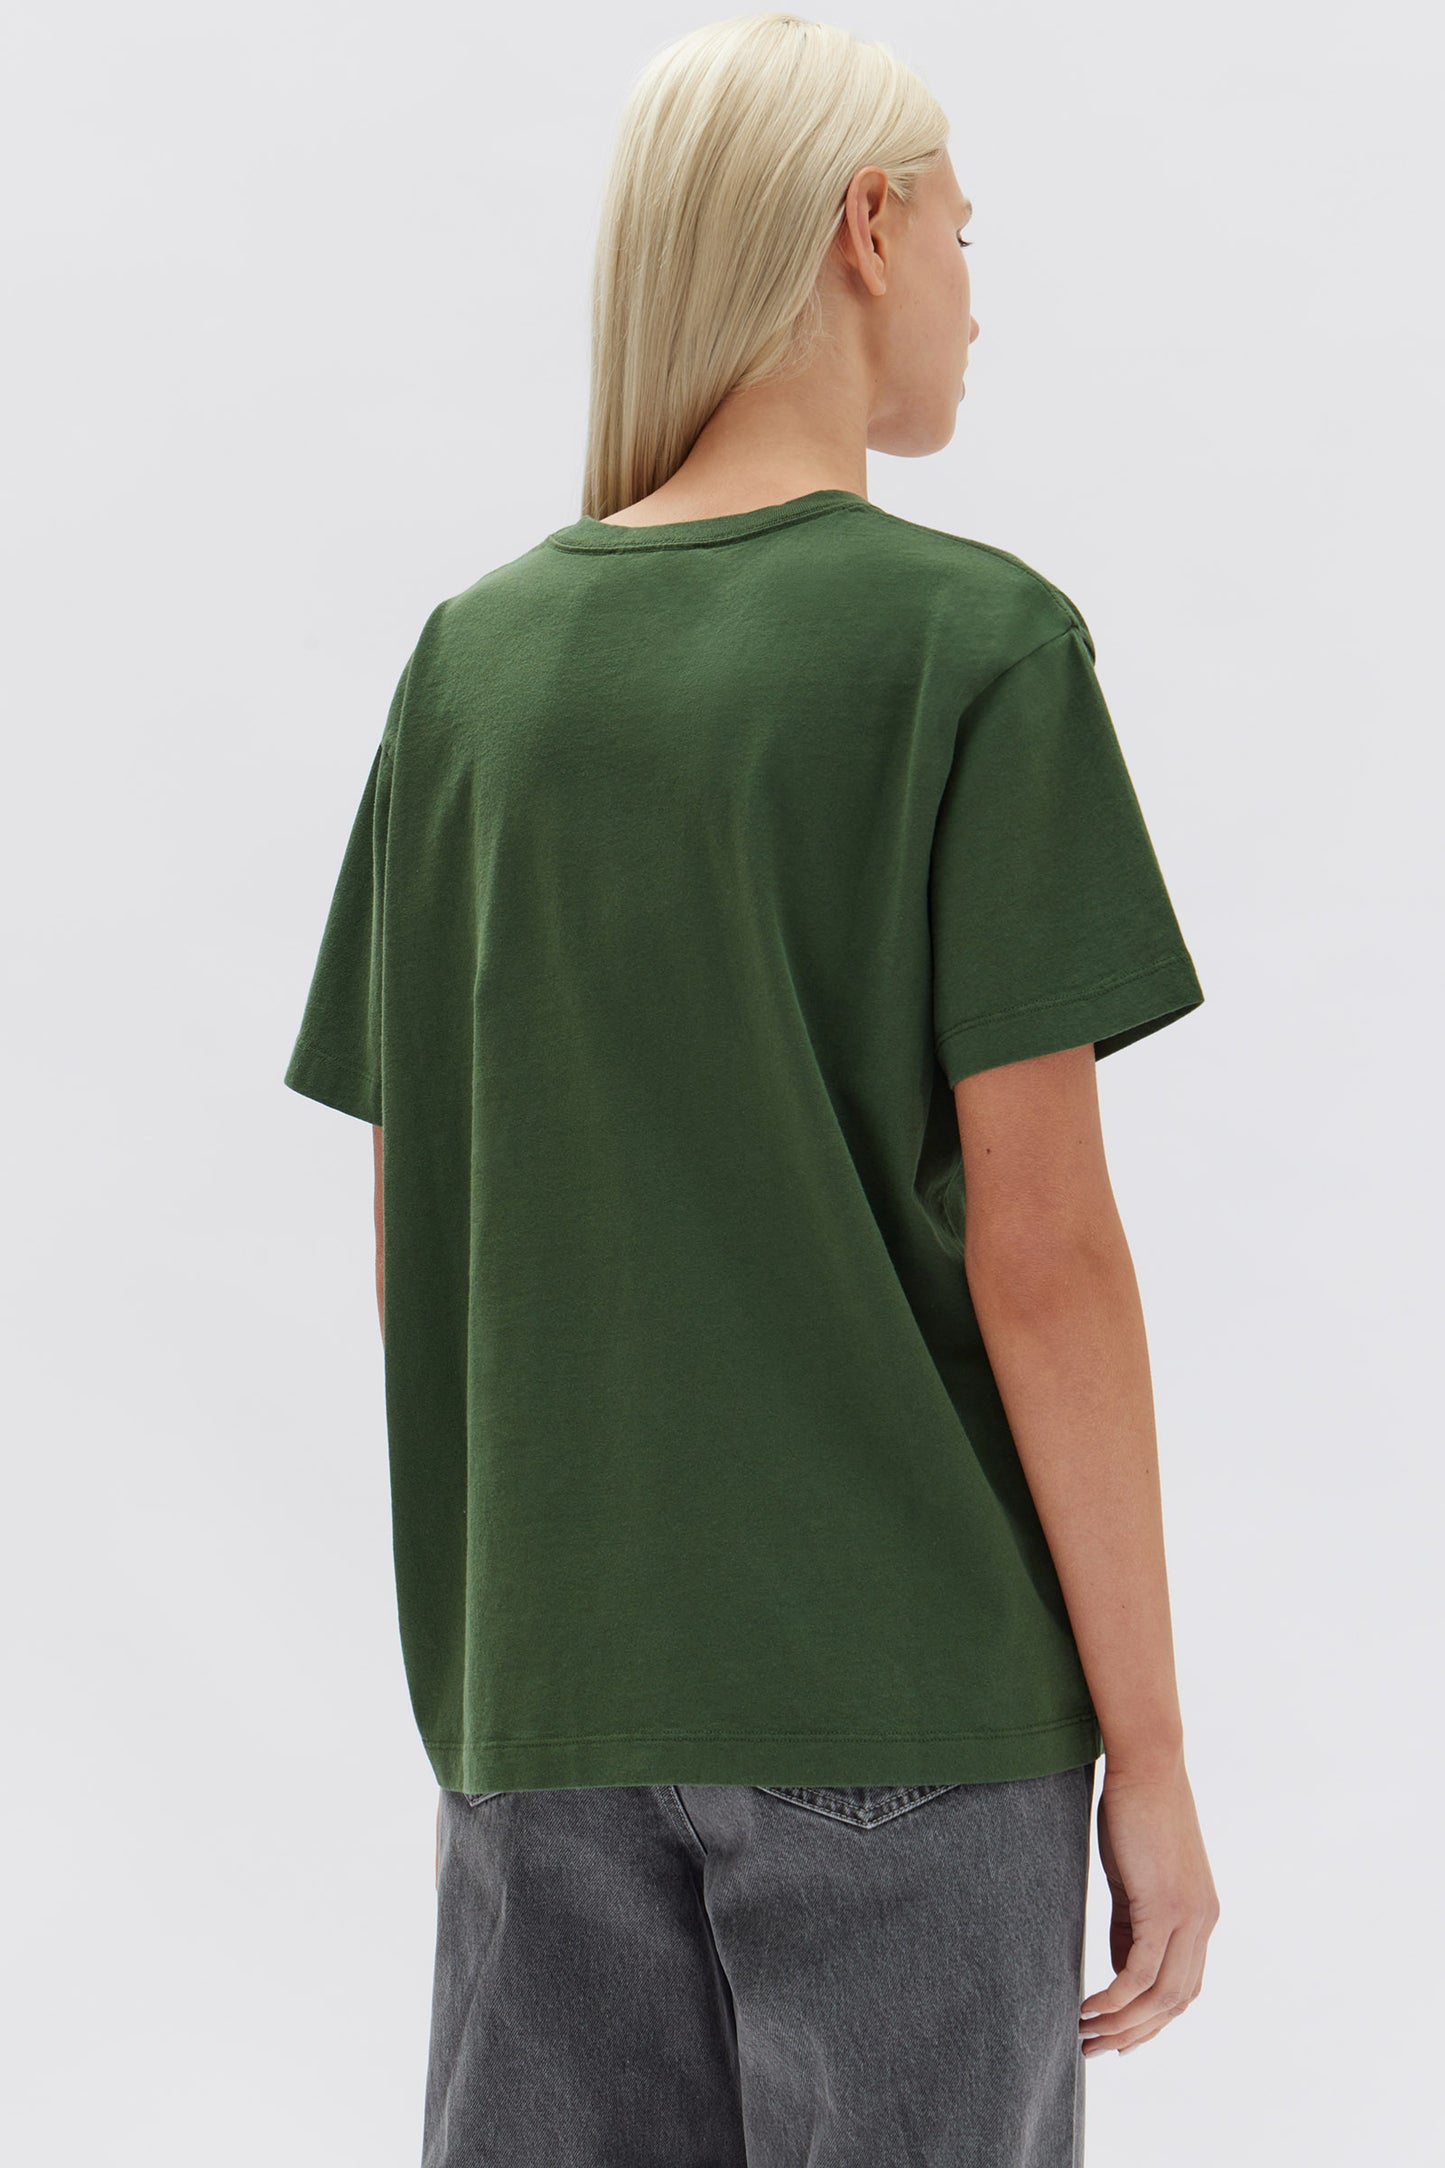 ASSEMBLY LABEL // Everyday Organic Logo Tee FOREST